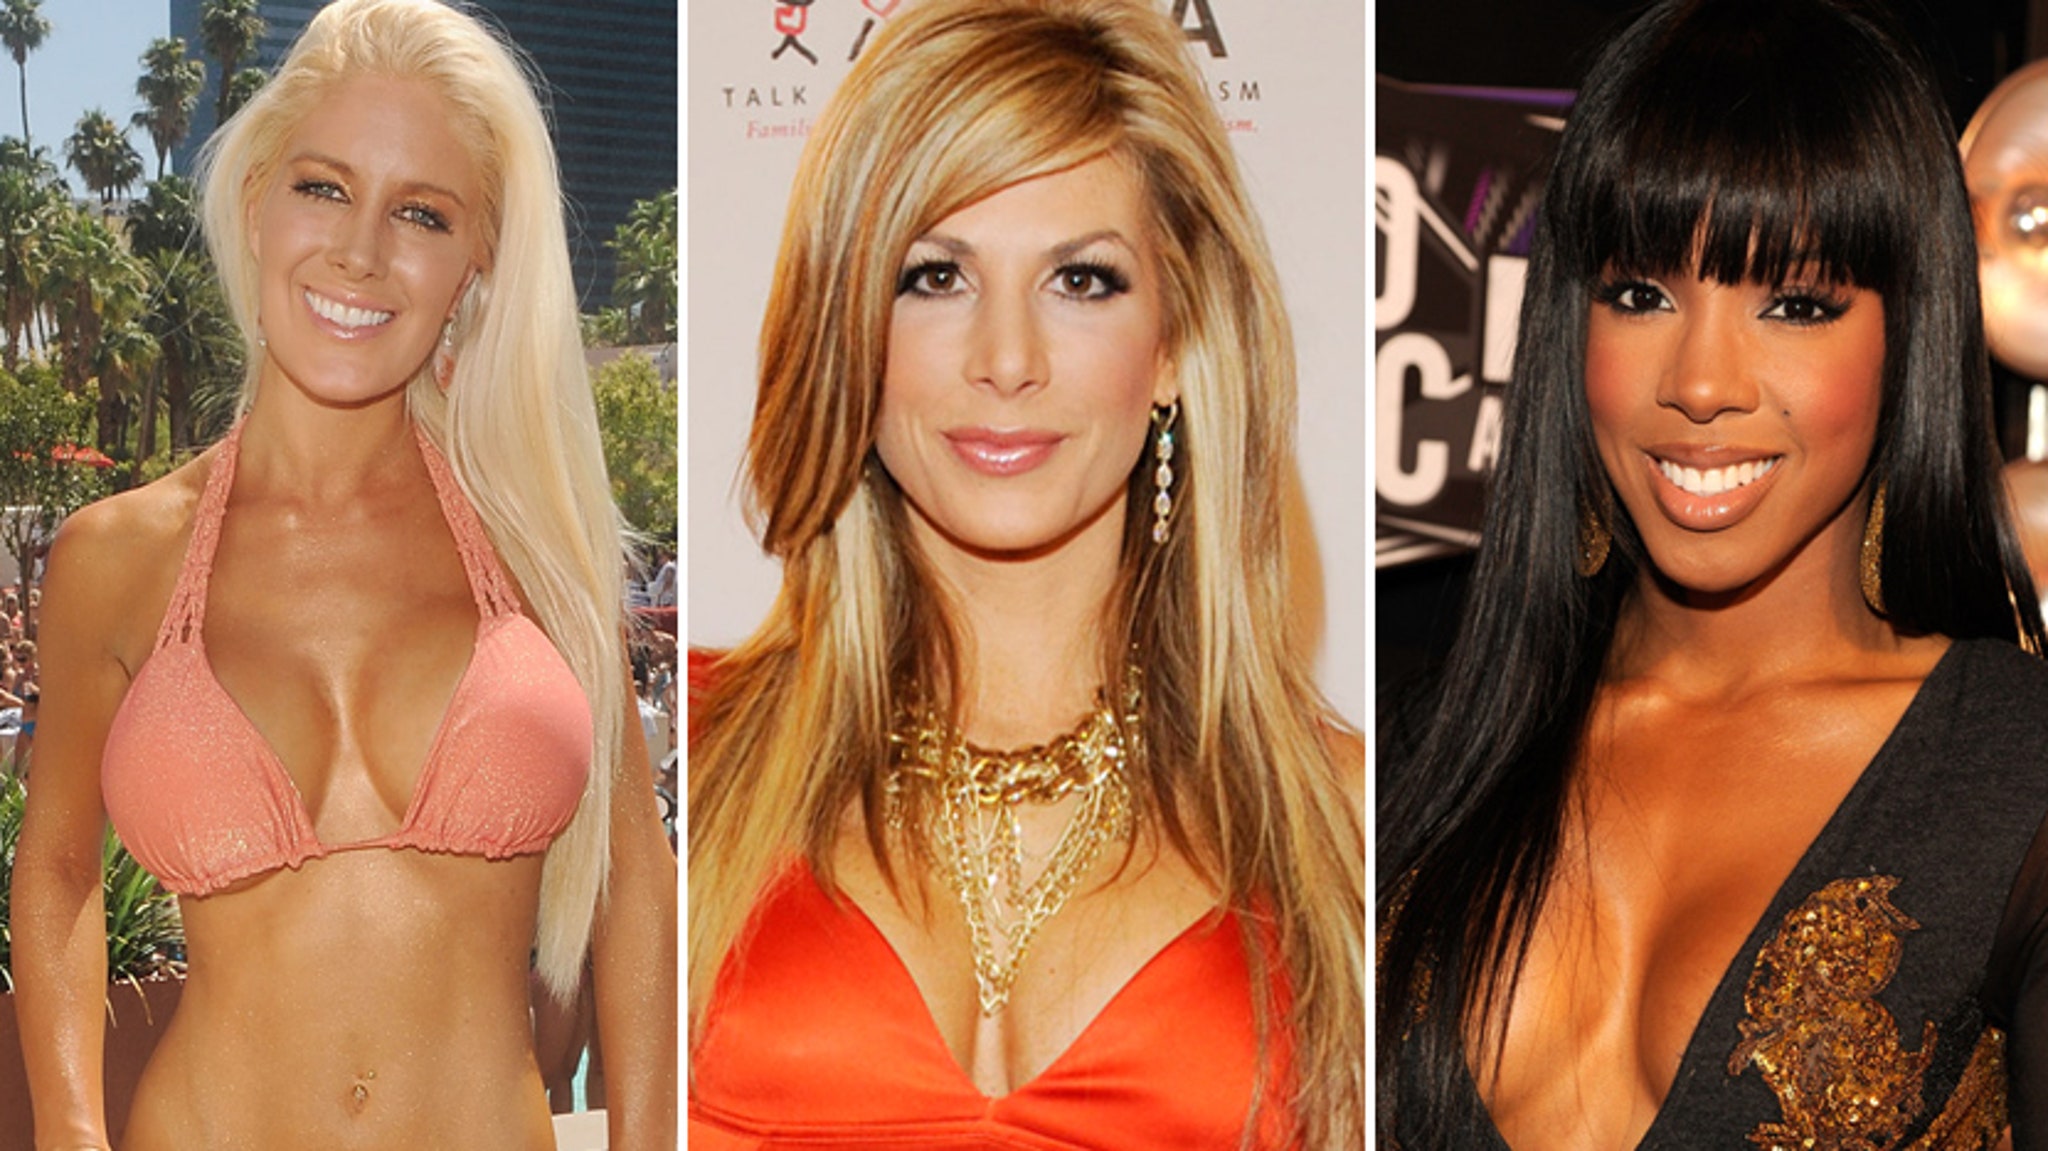 22 Stars Who've Opened Up About Plastic Surgery